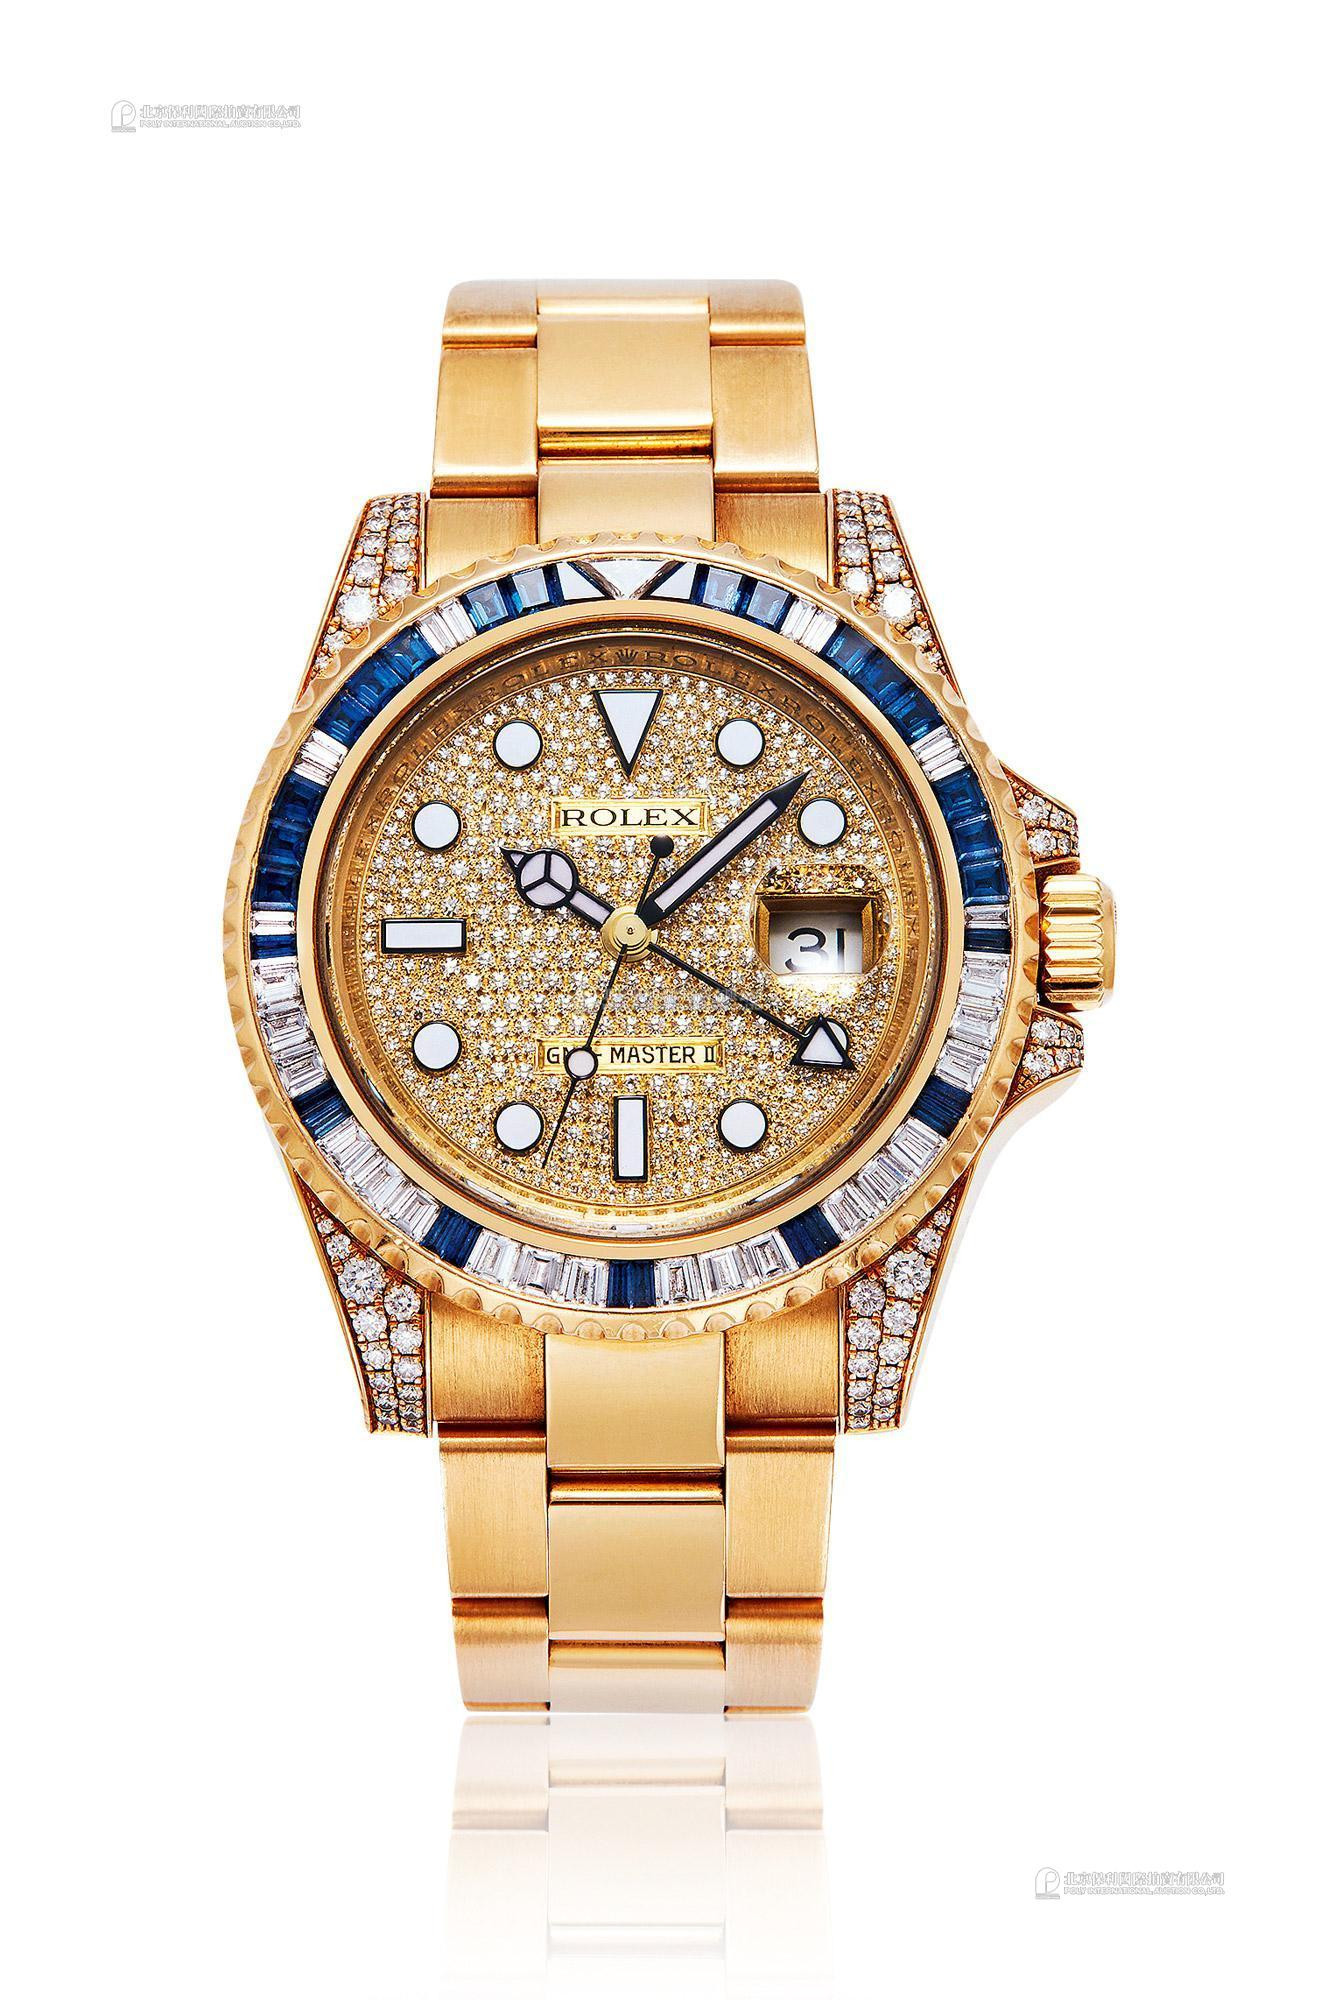 ROLEX A YELLOW GOLD AND DIAMOND AND SAPPHIRE-SET AUTOMATIC WRISTWATCH WITH DATE INDICATION